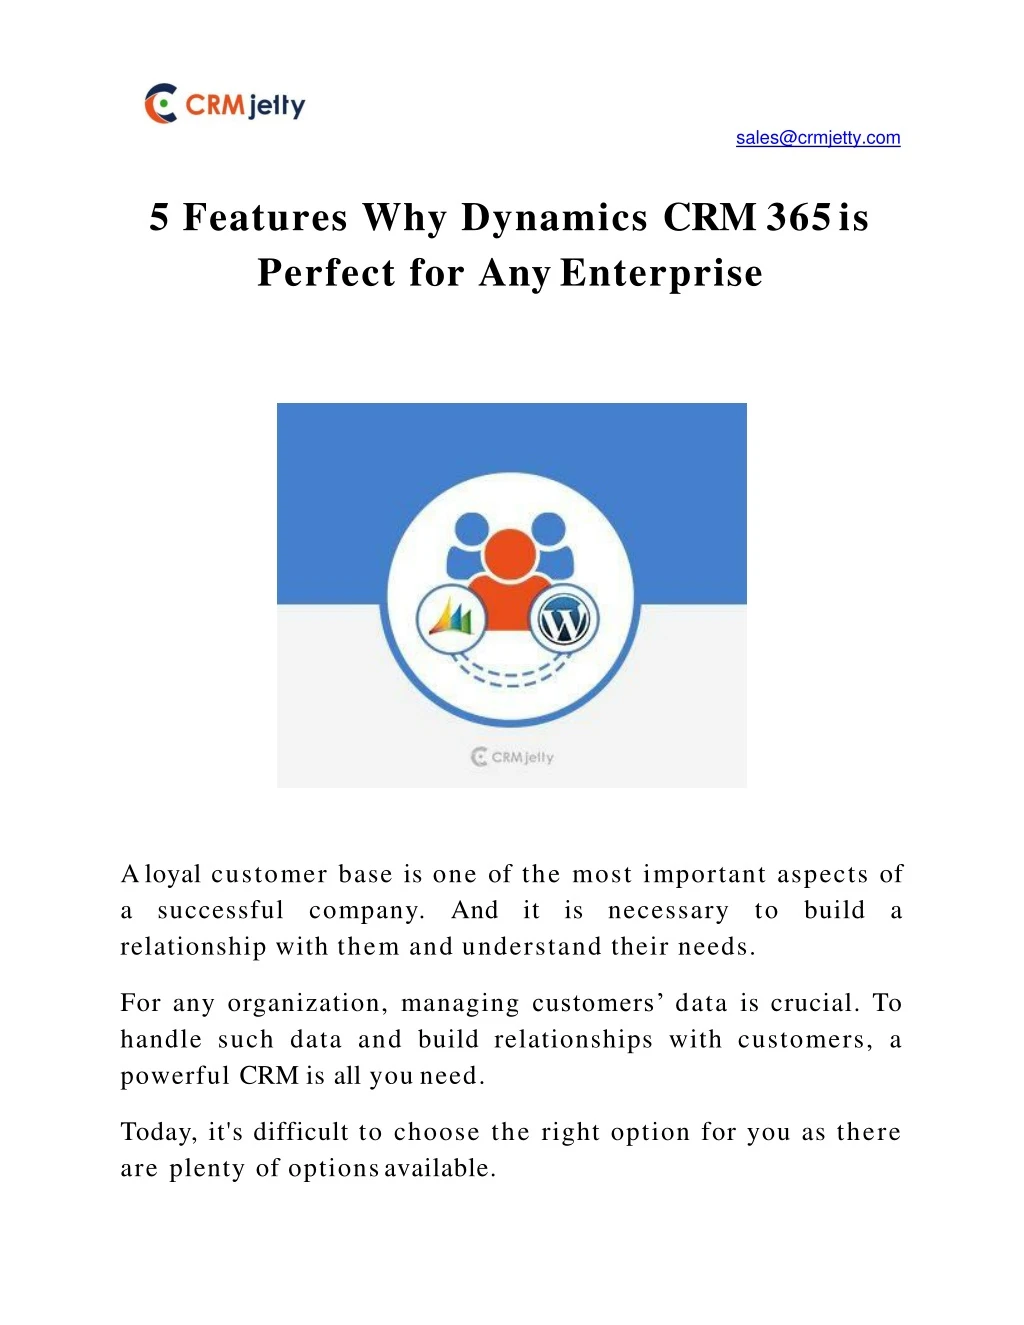 5 features why dynamics crm 365 is perfect for any enterprise